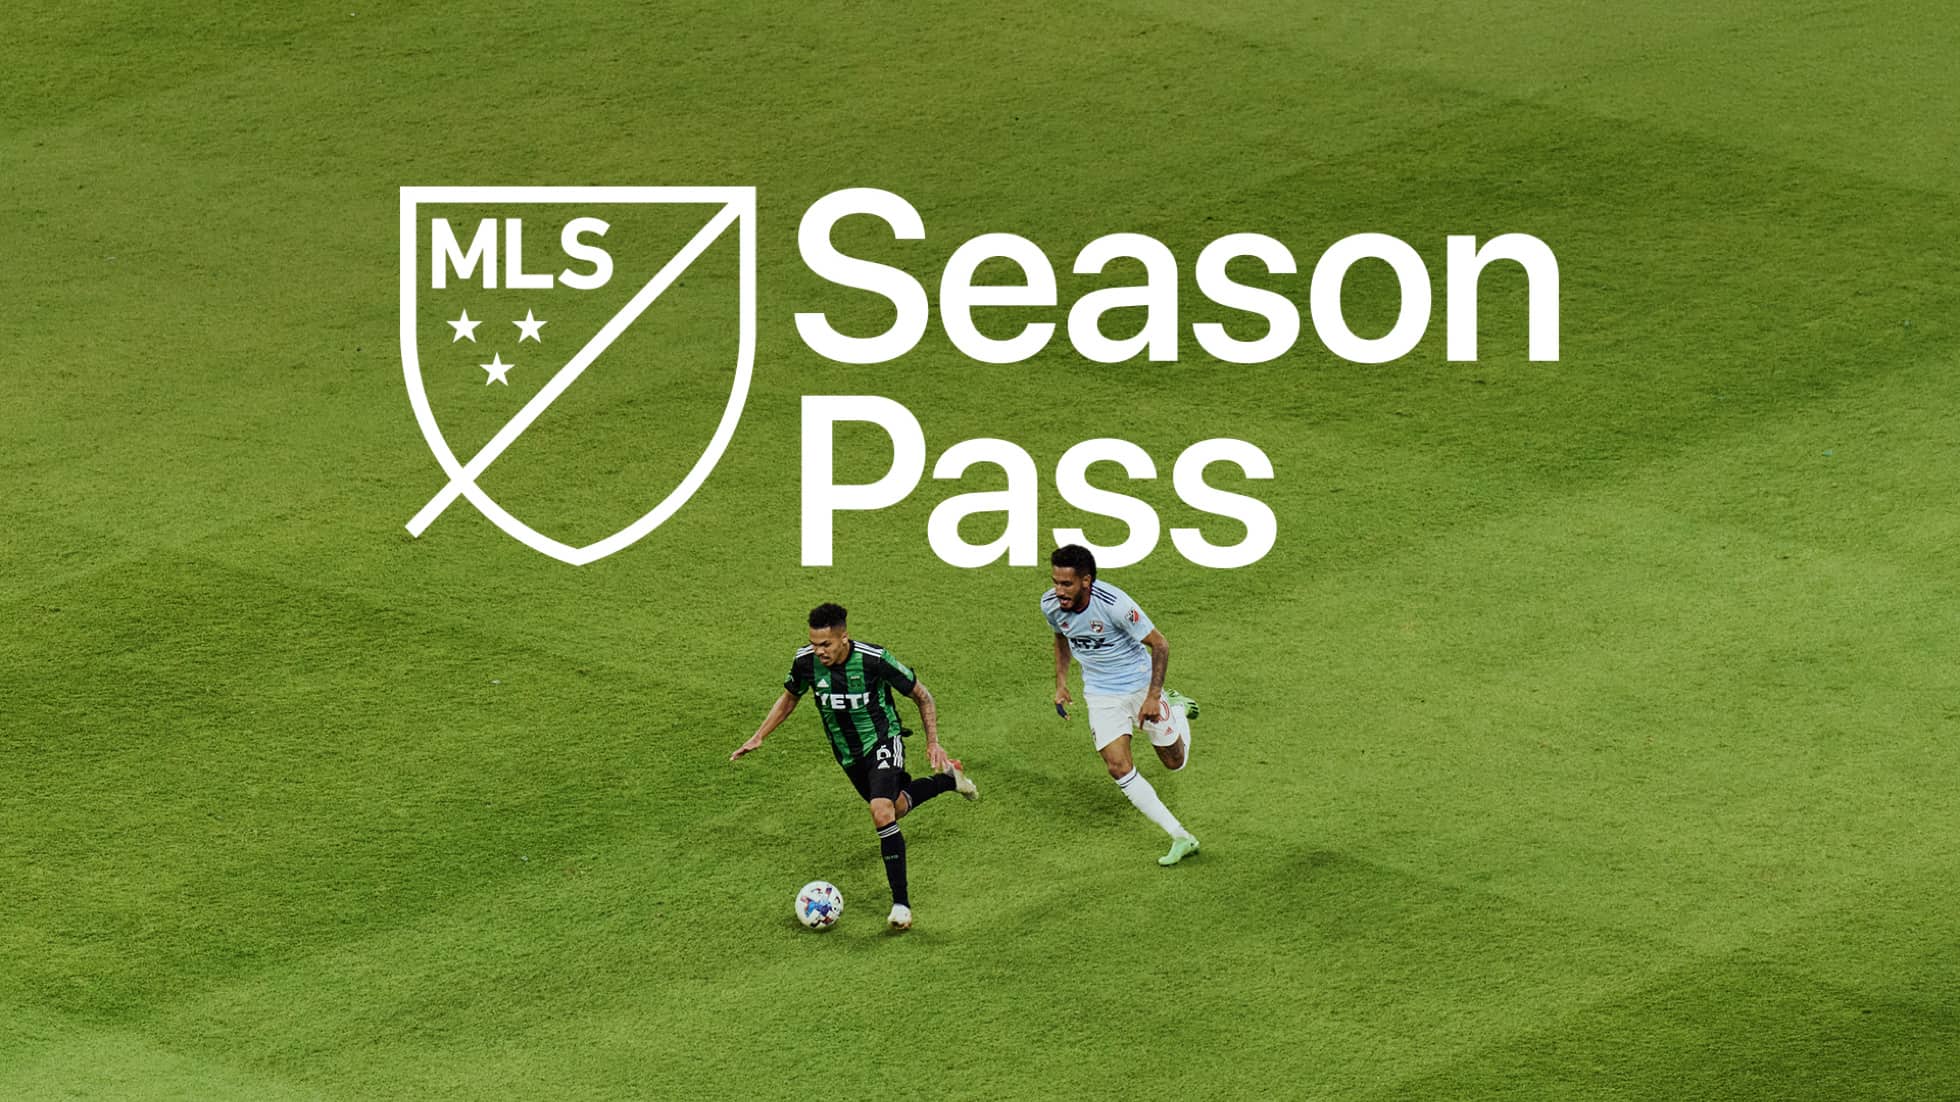 Two soccer players on a field and the "MLAS Season Pass" tagline in white